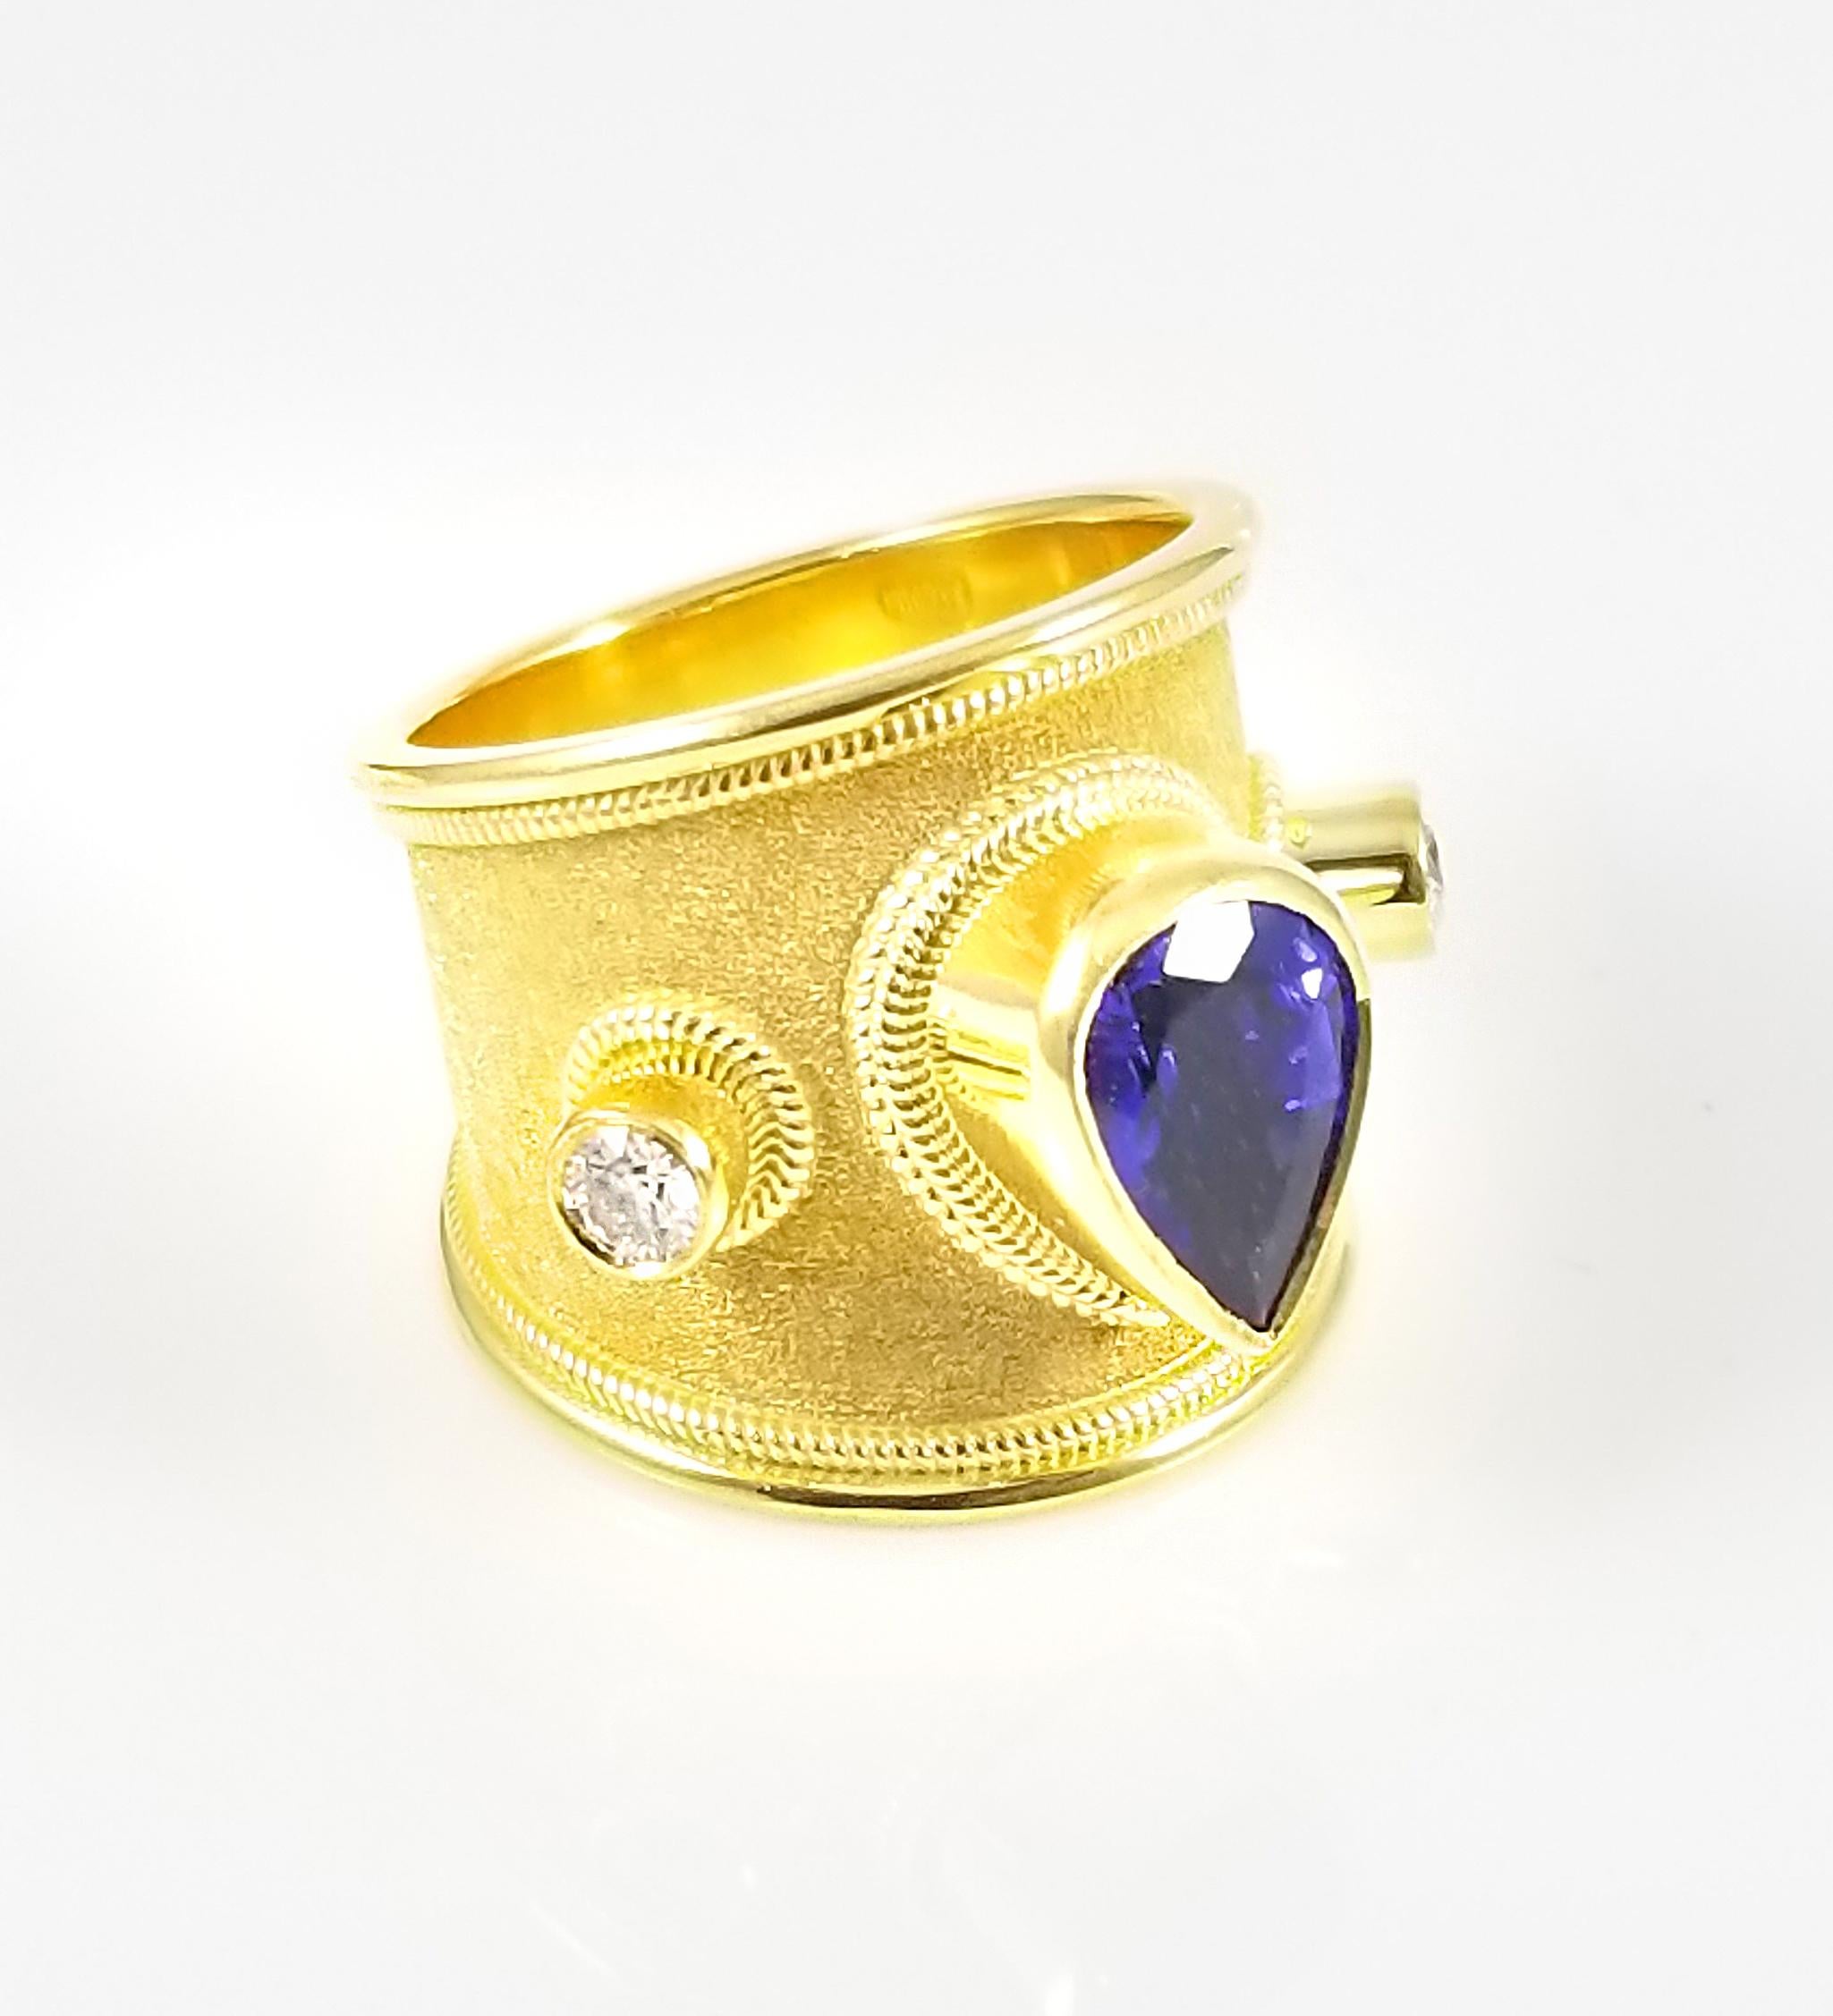 S.Georgios designer 18 Karat Solid Yellow Gold Wide Band Ring all handmade with the Byzantine granulation workmanship and a stunning unique velvet background. The gorgeous Ring has a center Pear Shape natural Tanzanite total weight of 3,48 Carats